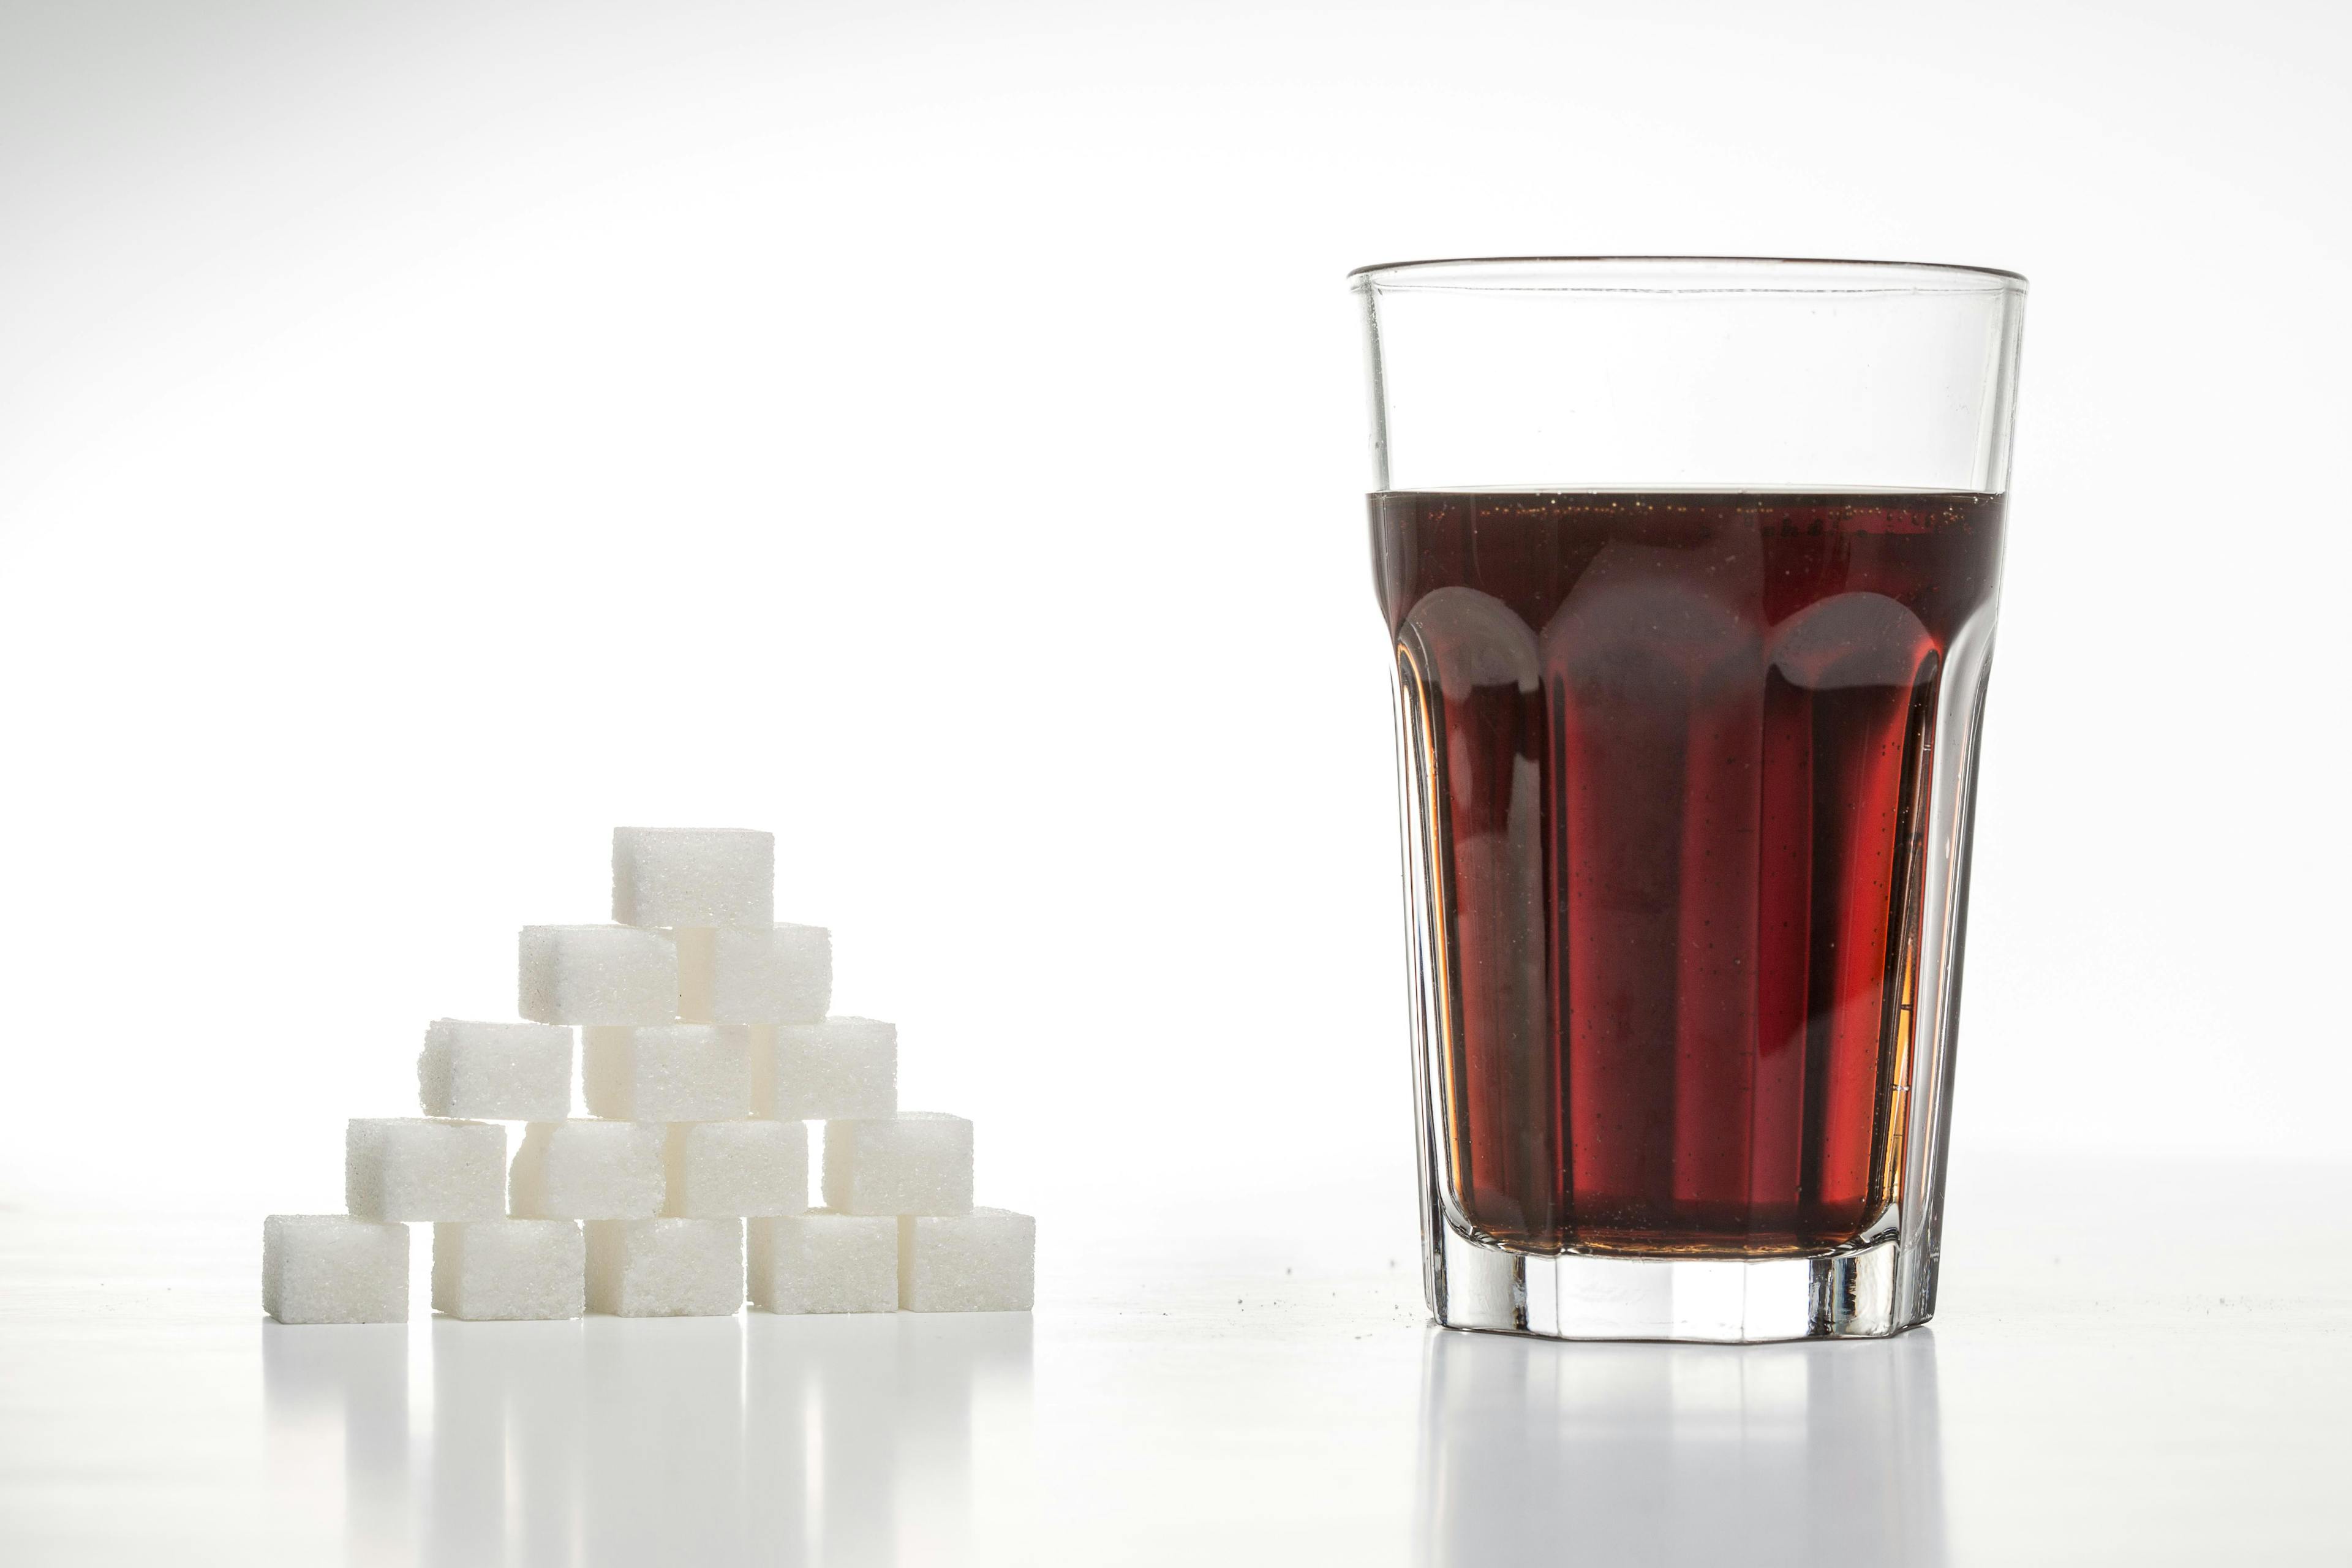 Imagery of sugar cubes and sweetened beverages 